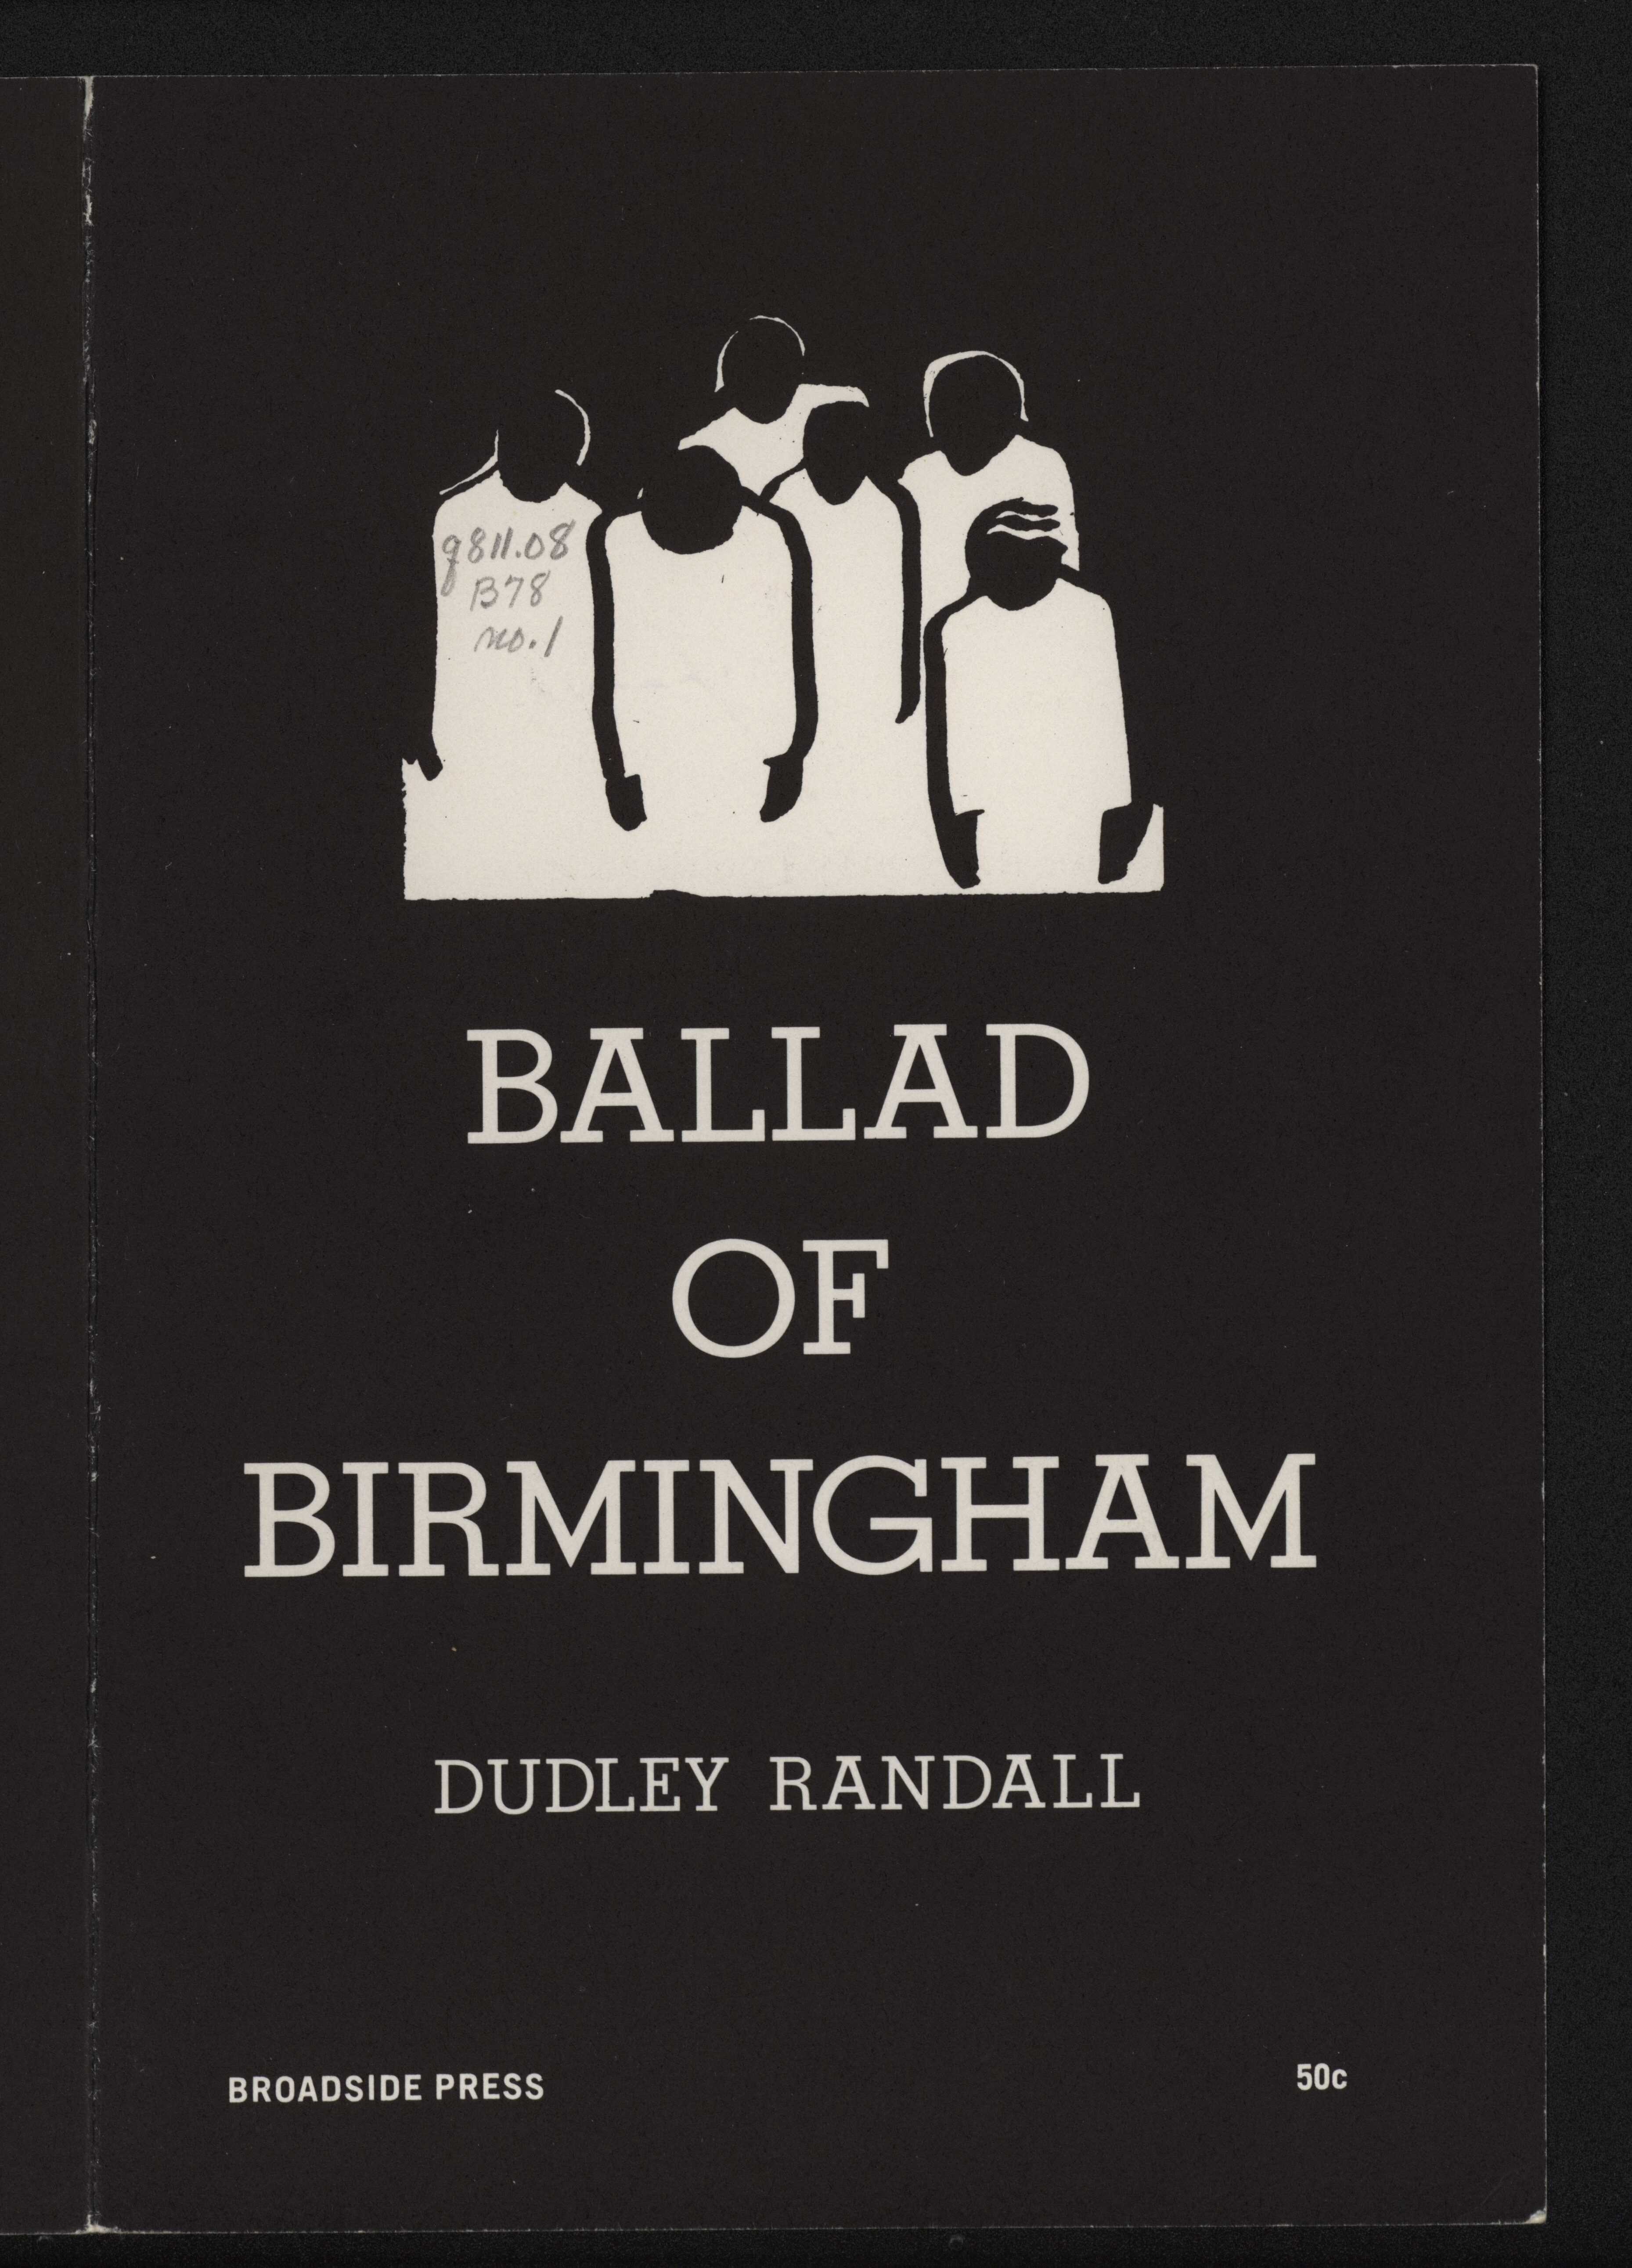 Cover image of the Ballad of Birmingham